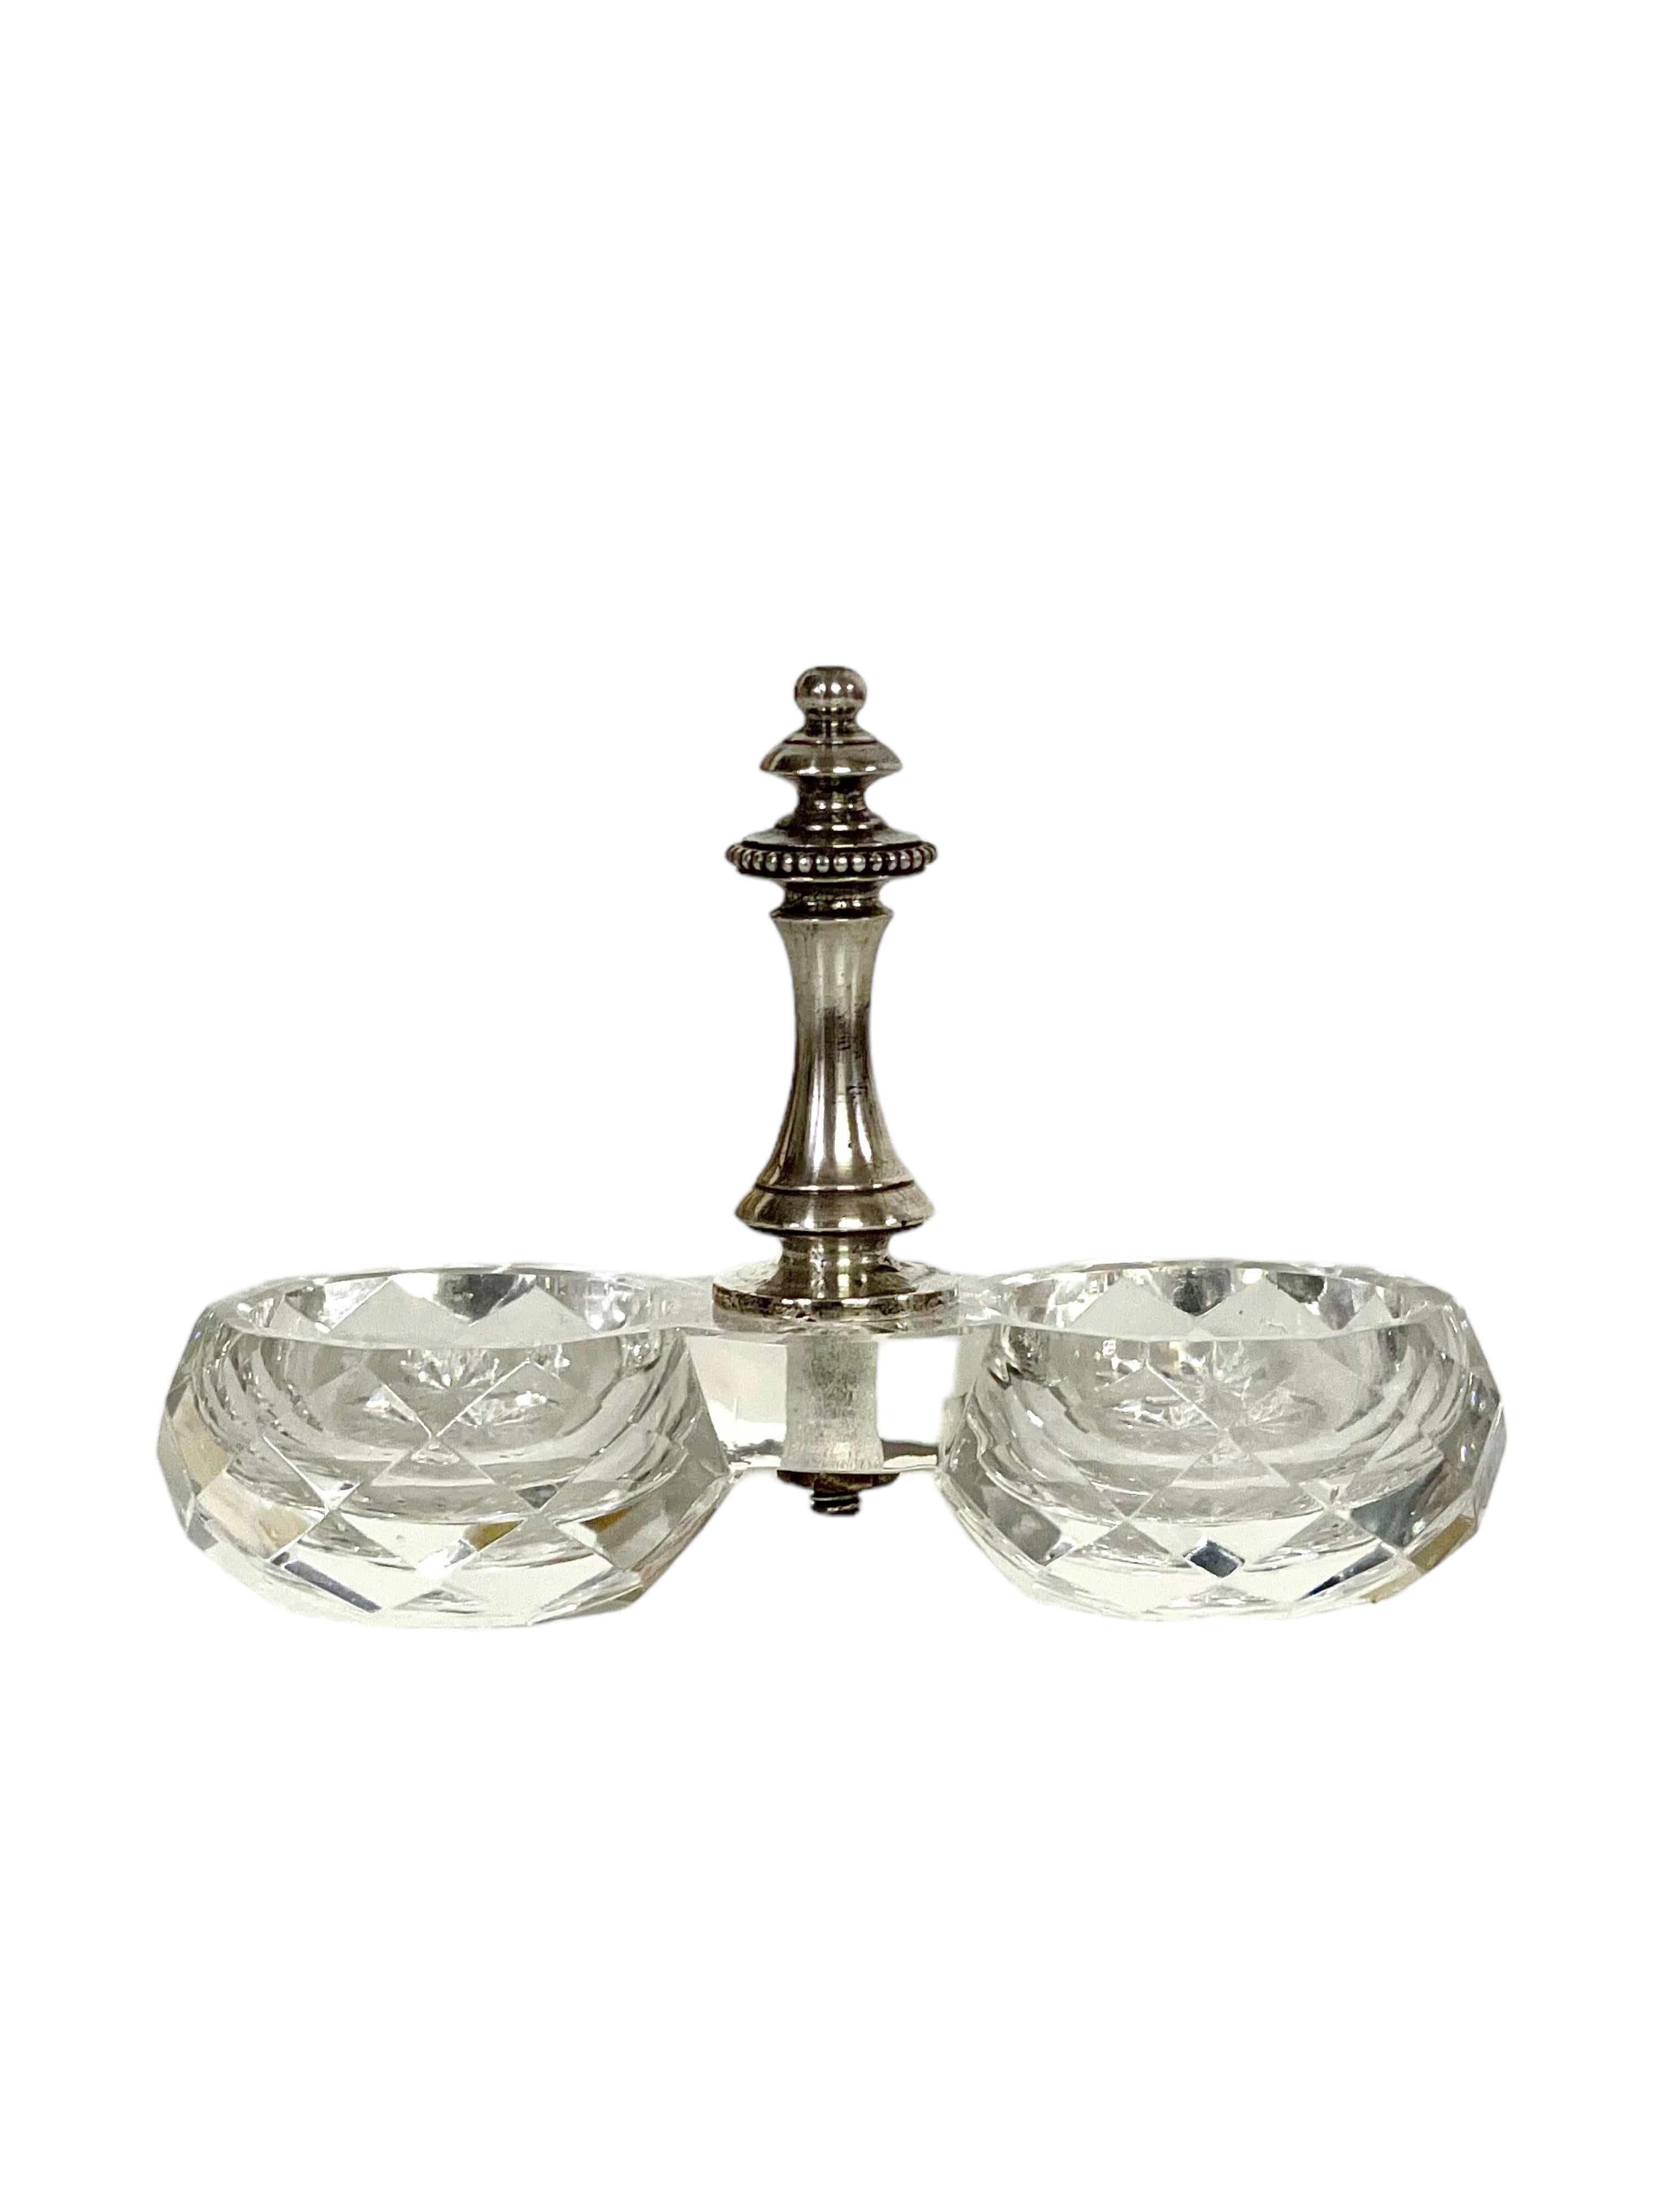 French 19th Century Baccarat Crystal Open Double Salt Cellar For Sale